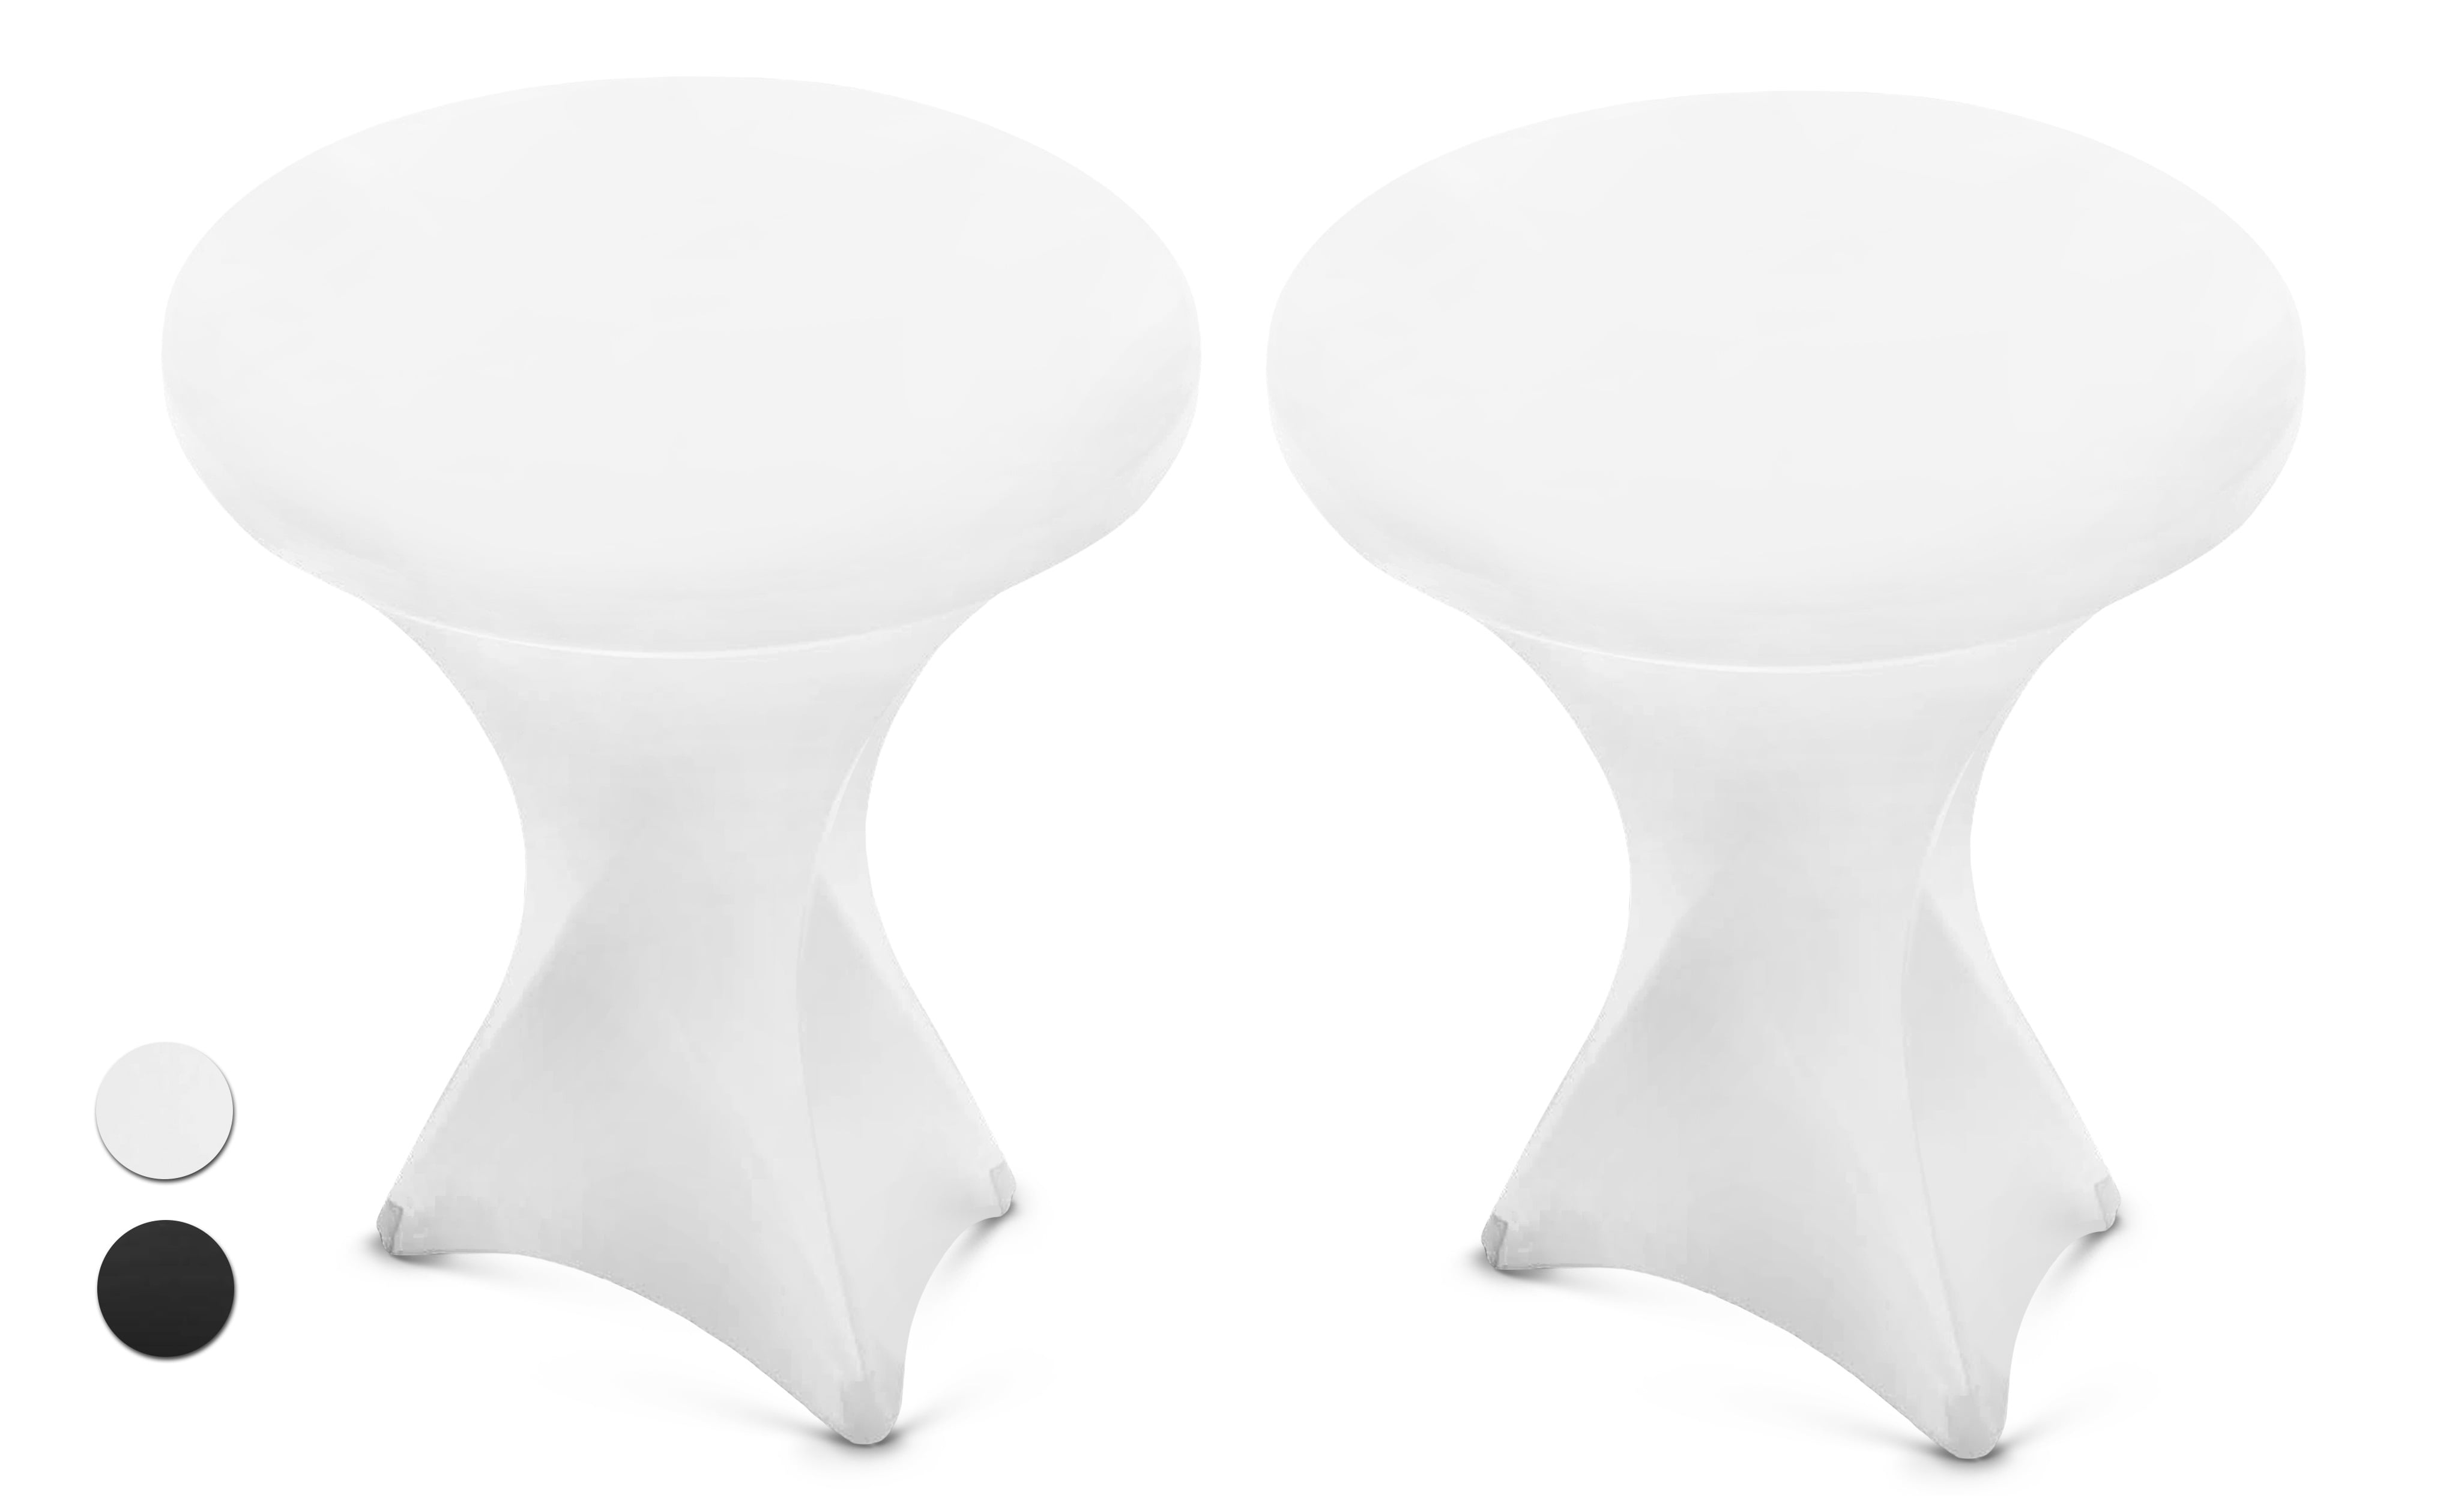 maybe Cable car Postman Event Linens 2-Pack White Spandex Cocktail Table Cover - Fitted High Top Table  Cloth, Stretch Tablecloth Covers for 30 inch Round Cocktail Tables -  Walmart.com